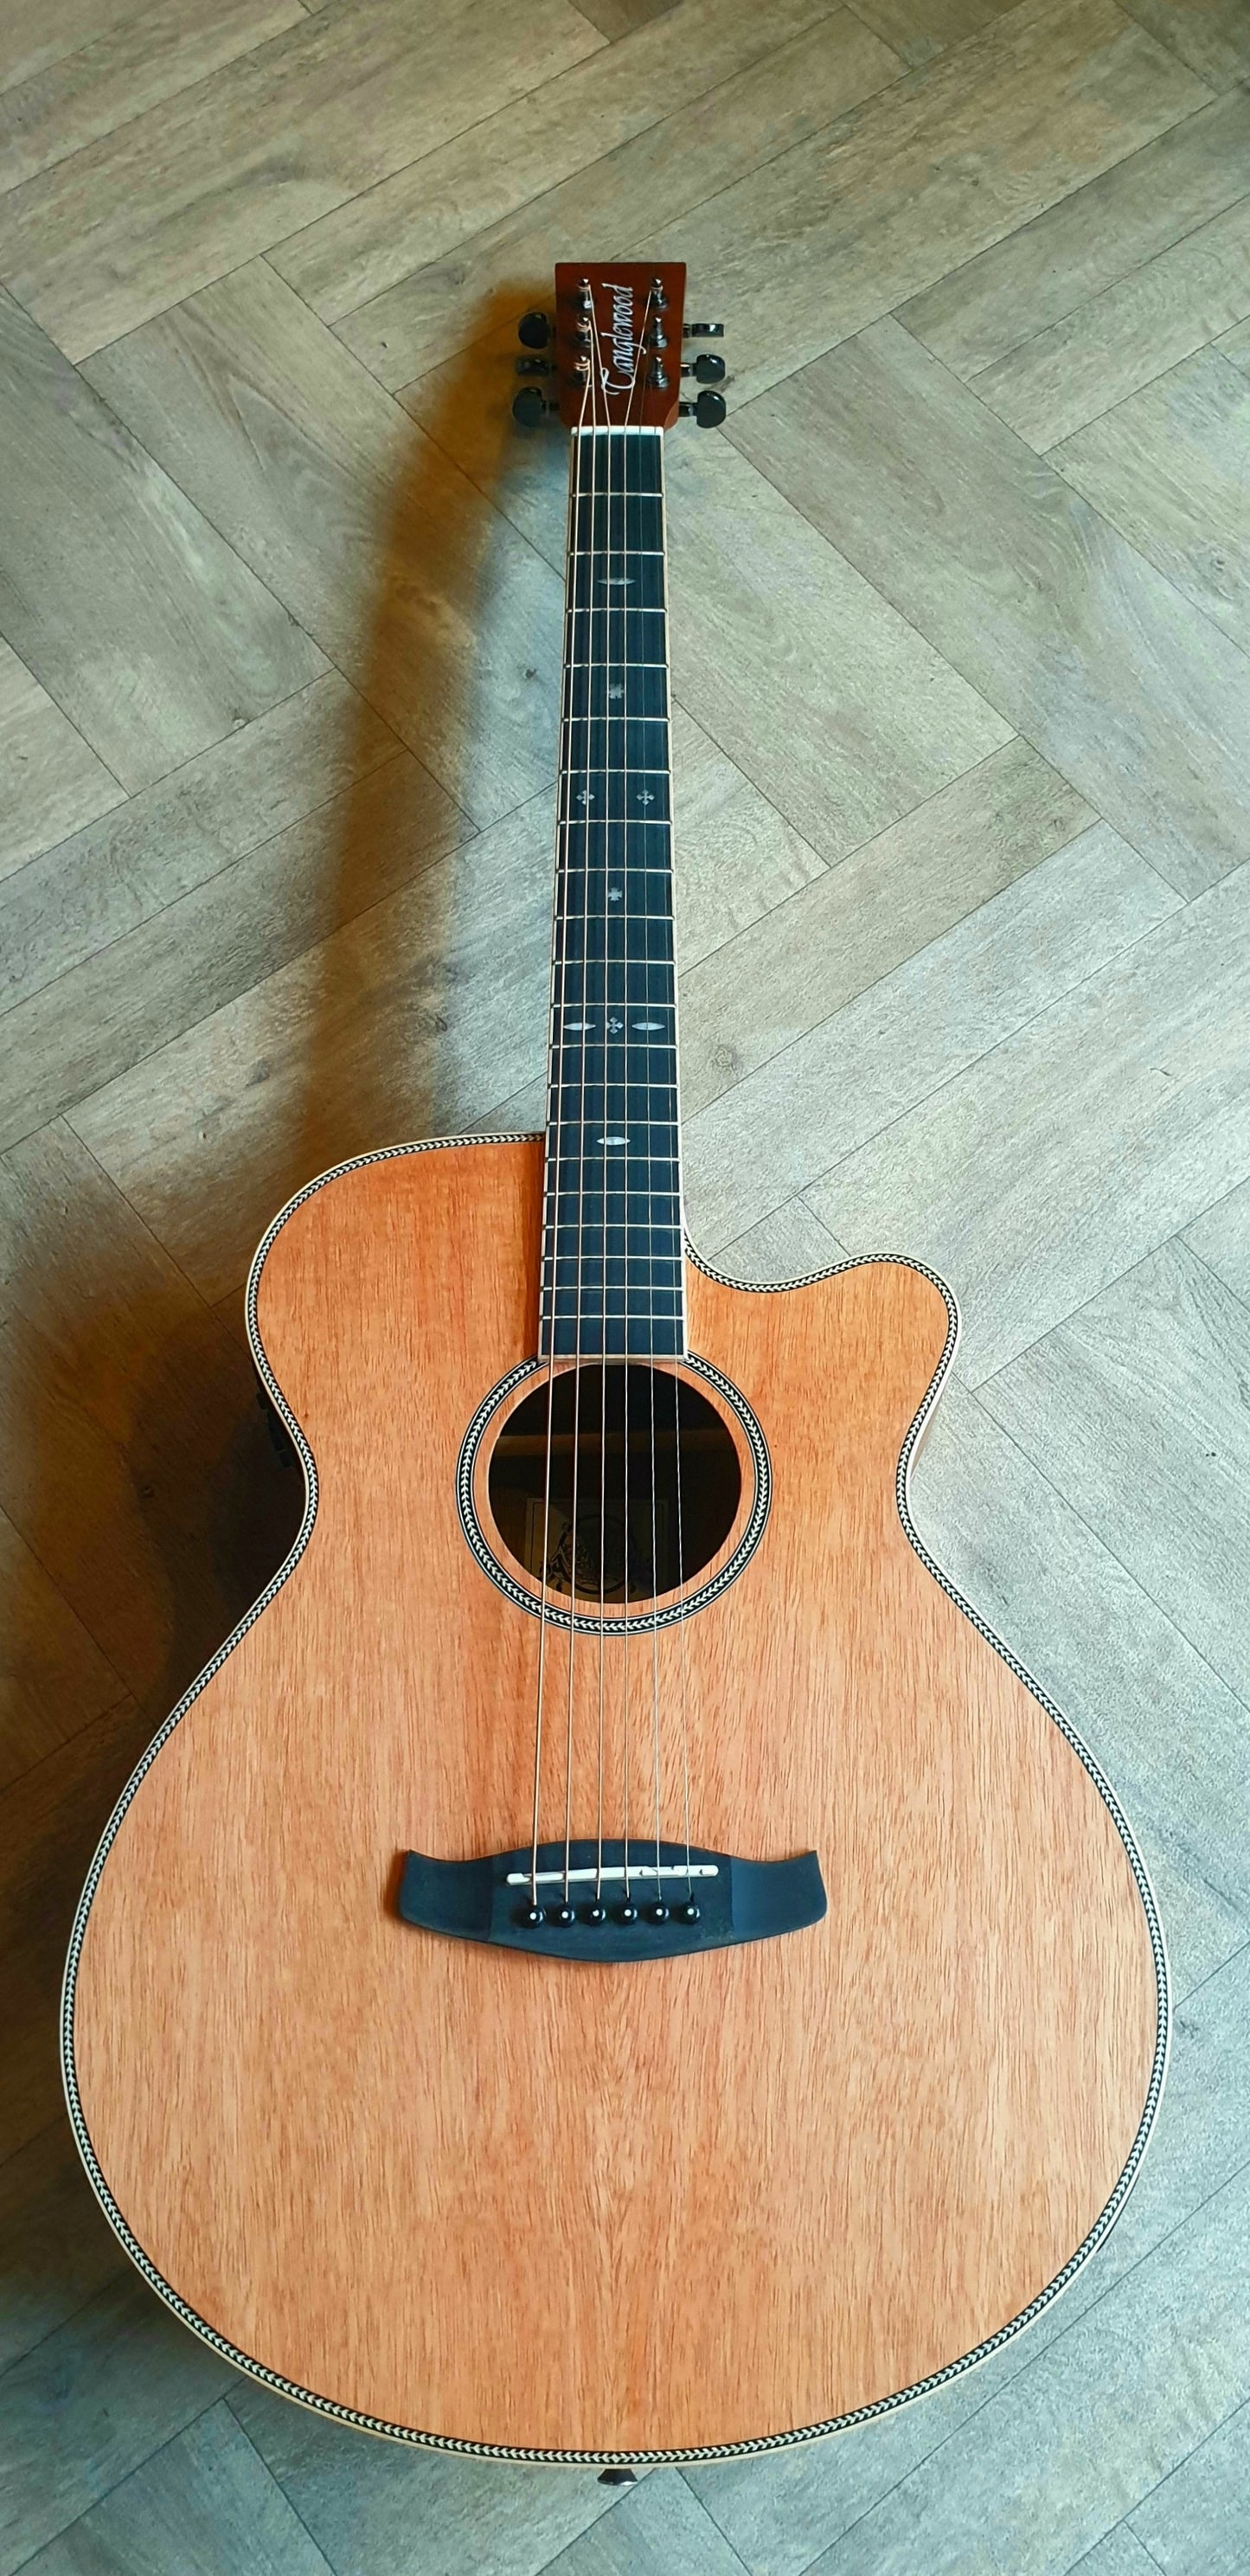 Tanglewood Reunion TRSF CE BW Natural